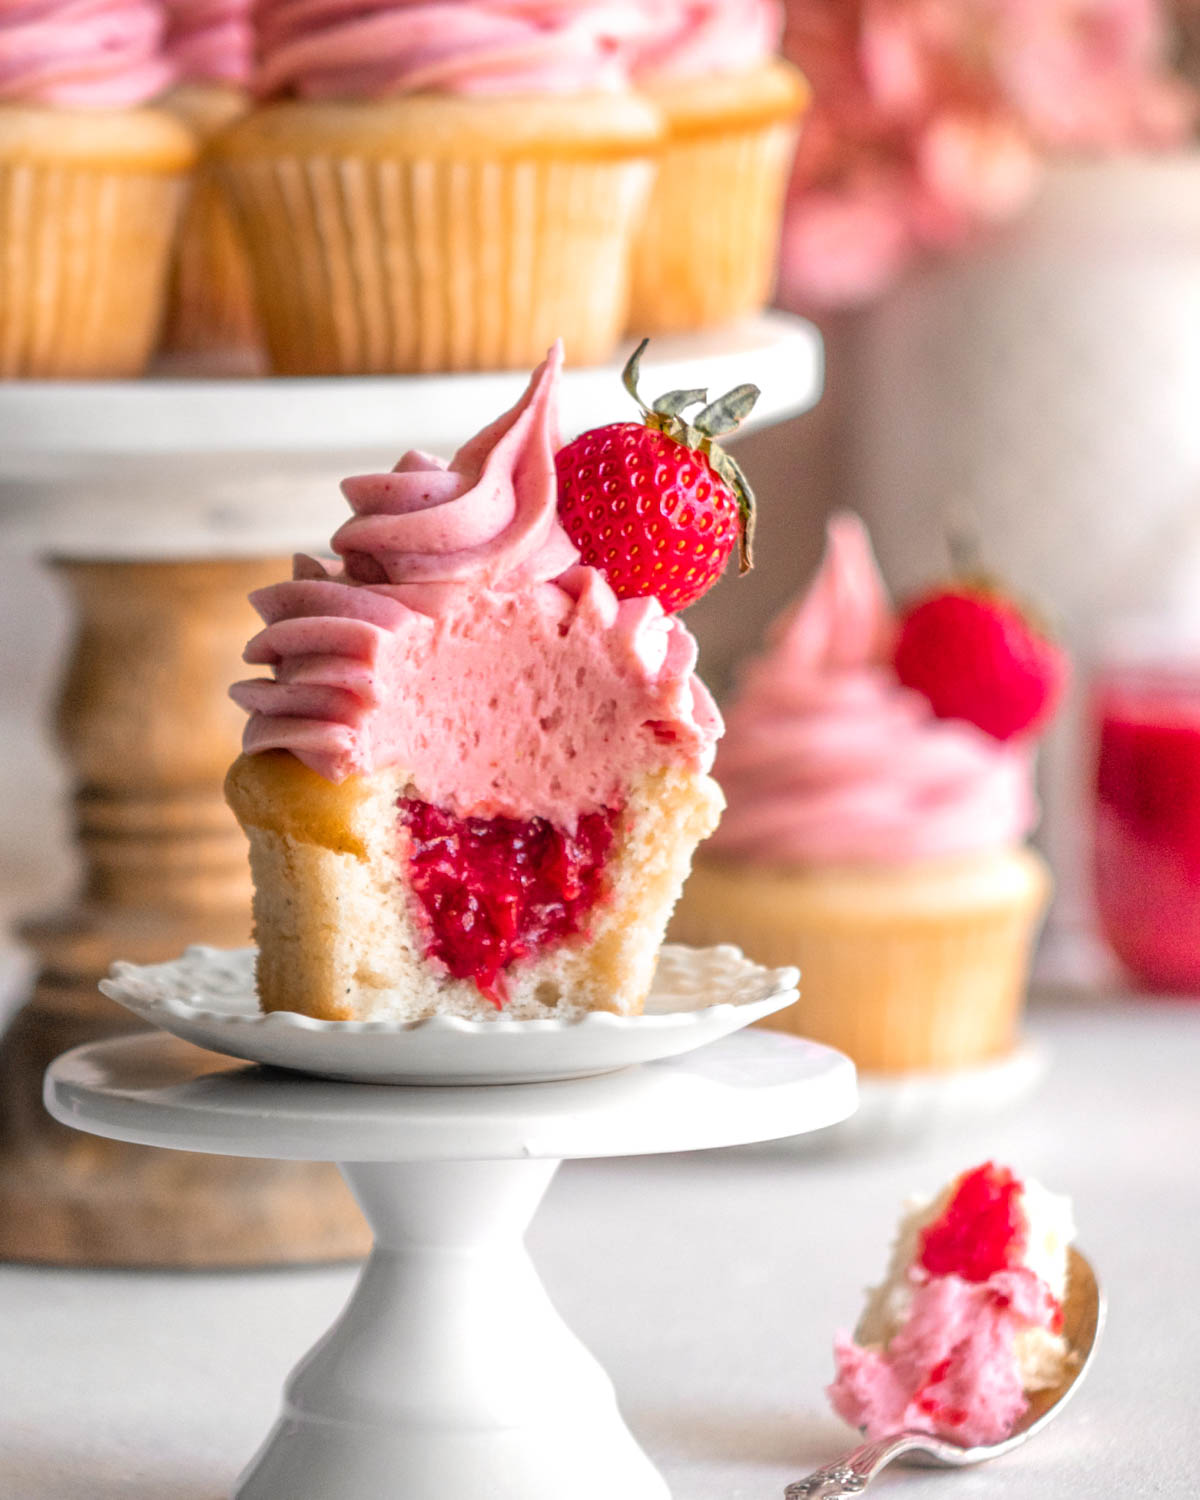 strawberry cupcake on a cupcake holder with a bite taken out, with other cupcakes in the background 